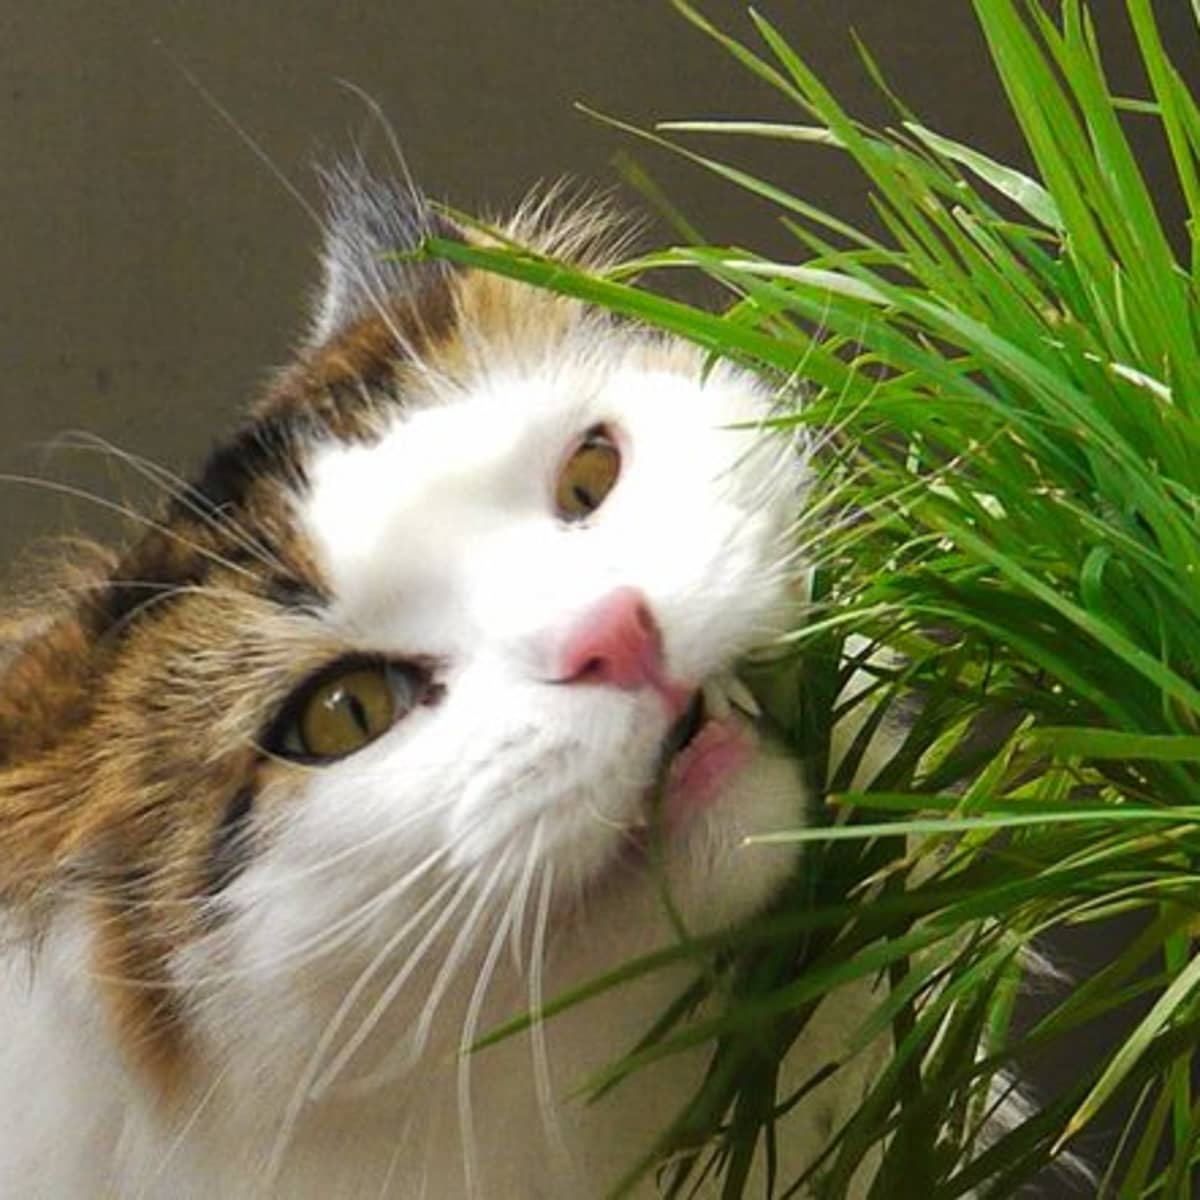 7 Plants That Could Kill Your Pet